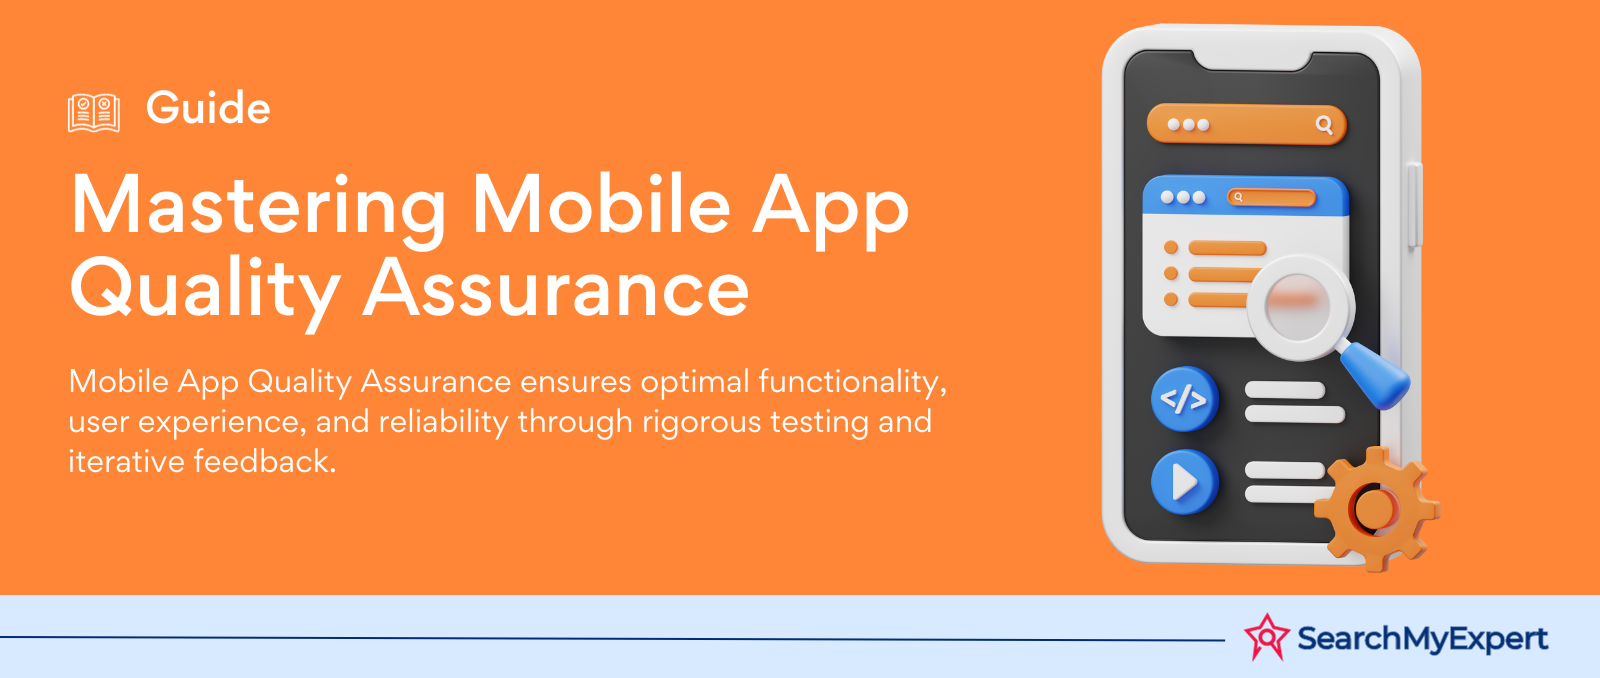 Mastering Mobile App Quality Assurance